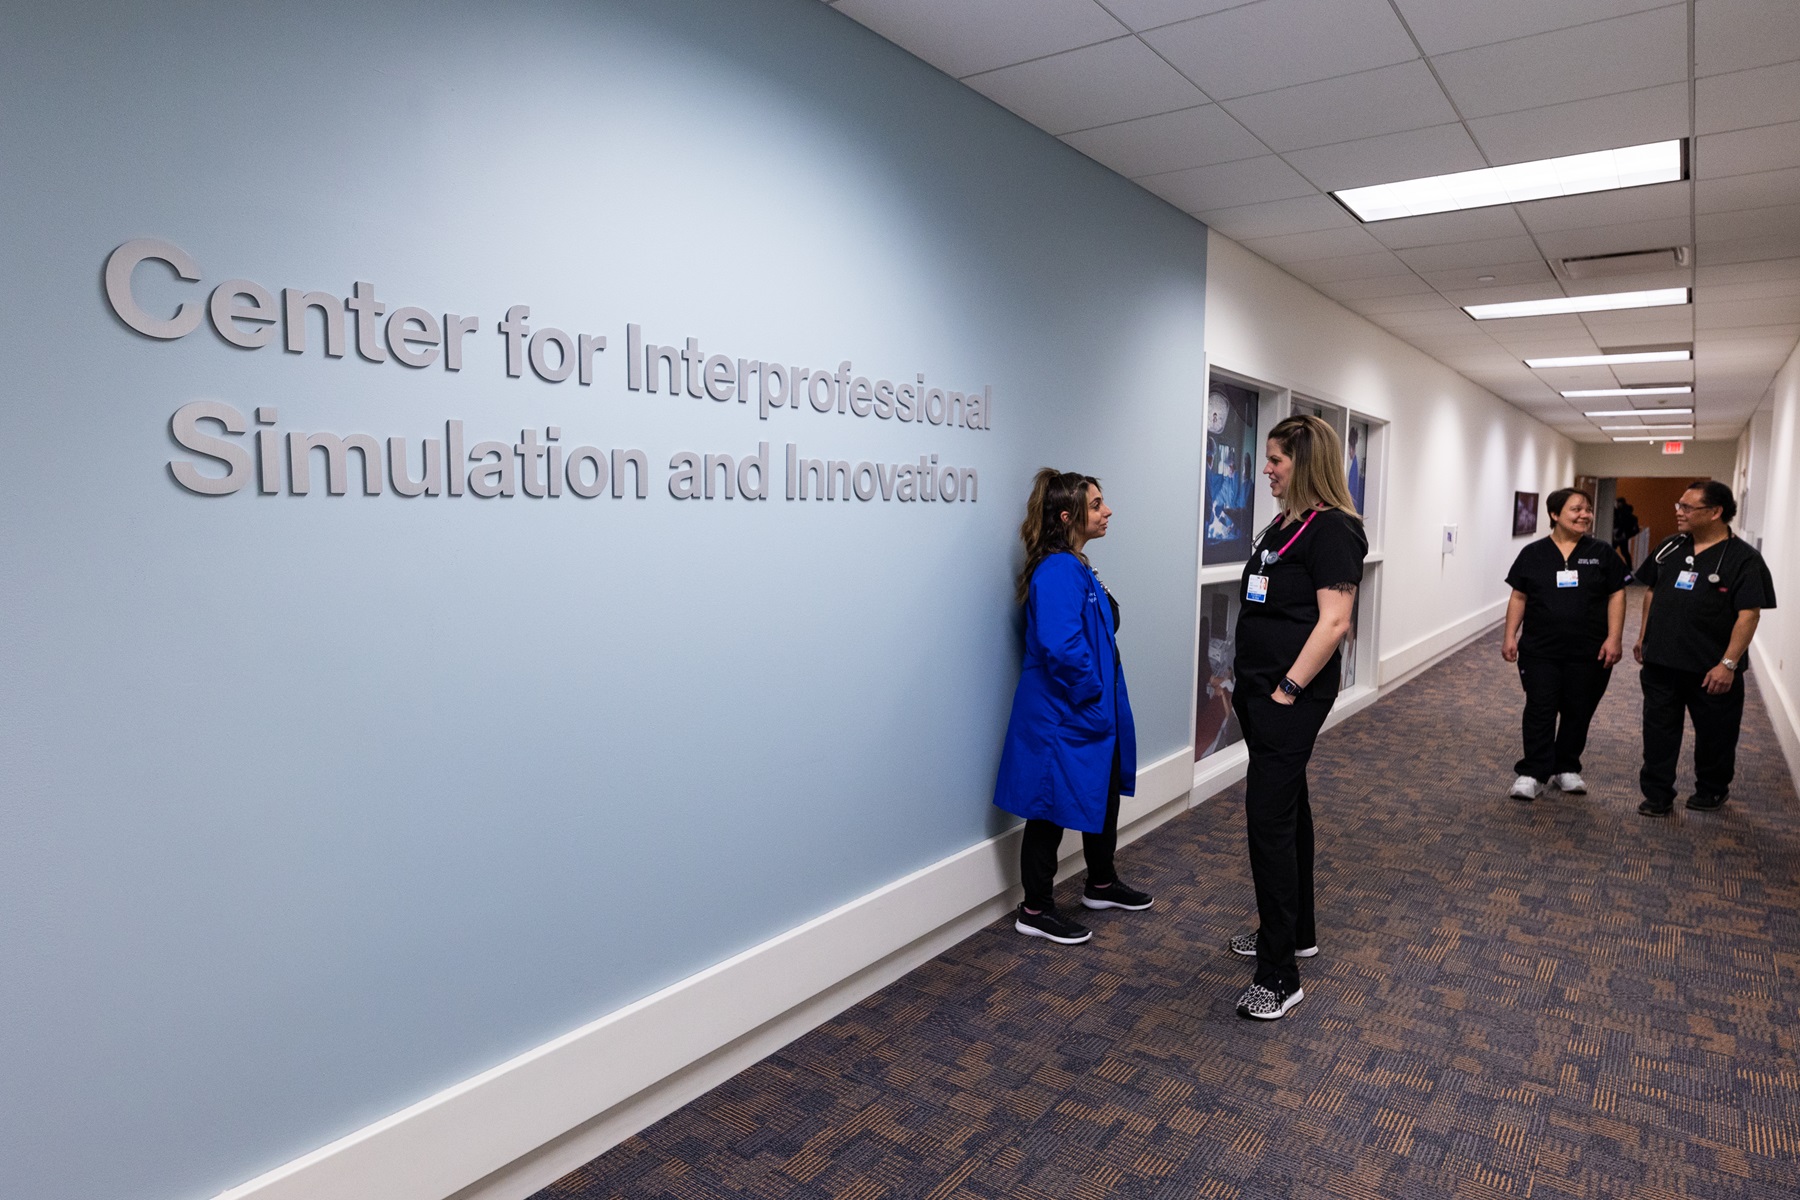 Health careers students interact in the Center for Interprofessional Simulation and Innovation